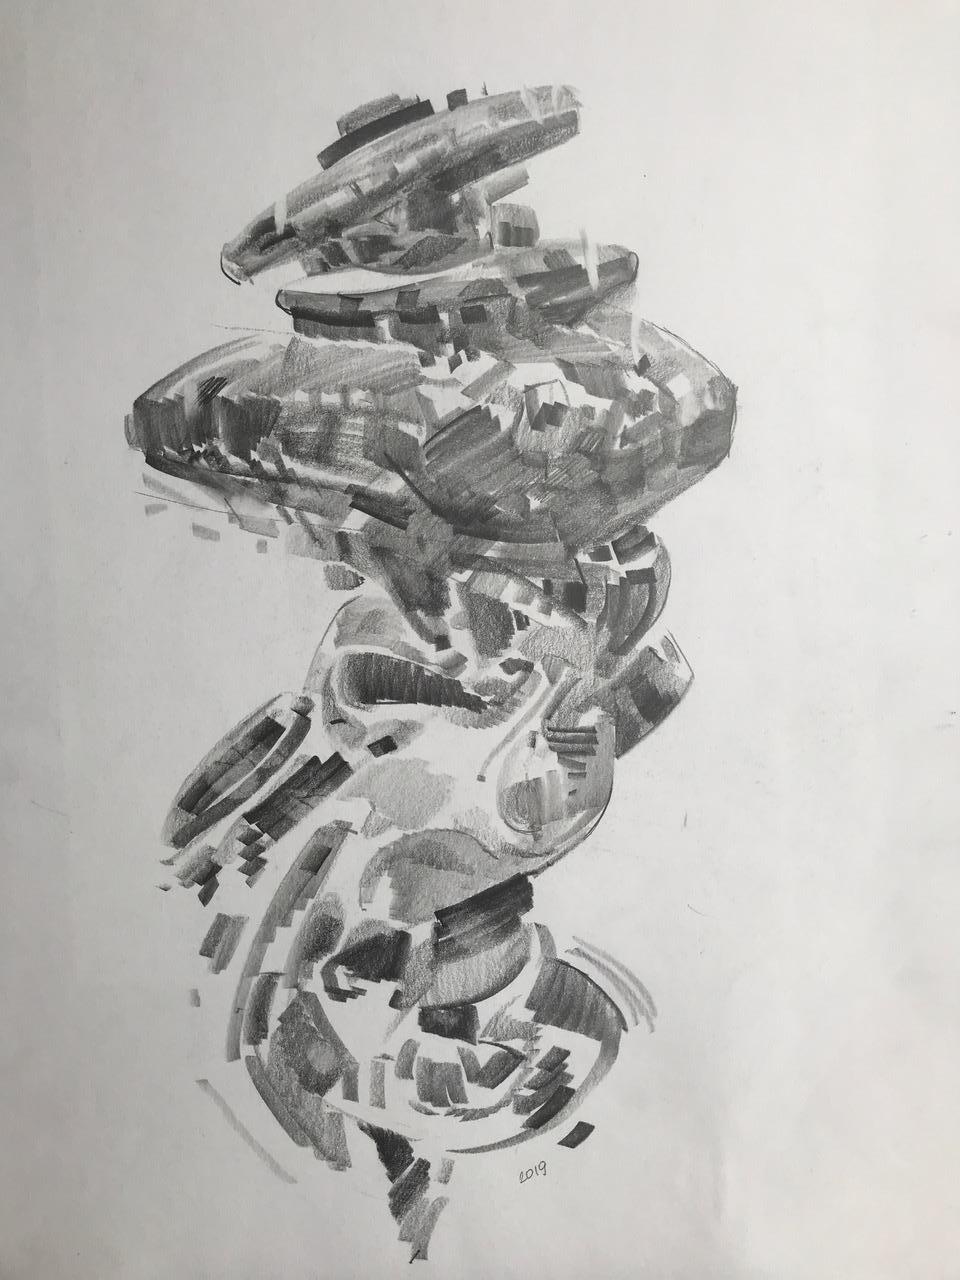 Today Leonid Tomilin's drawings are the result of more than 35 years of experimentation with technique and material (paper, graphite pencil). 

Alexander Glezer, director general of the Museum of Contemporary Russian Art in Jersey City, USA, defined